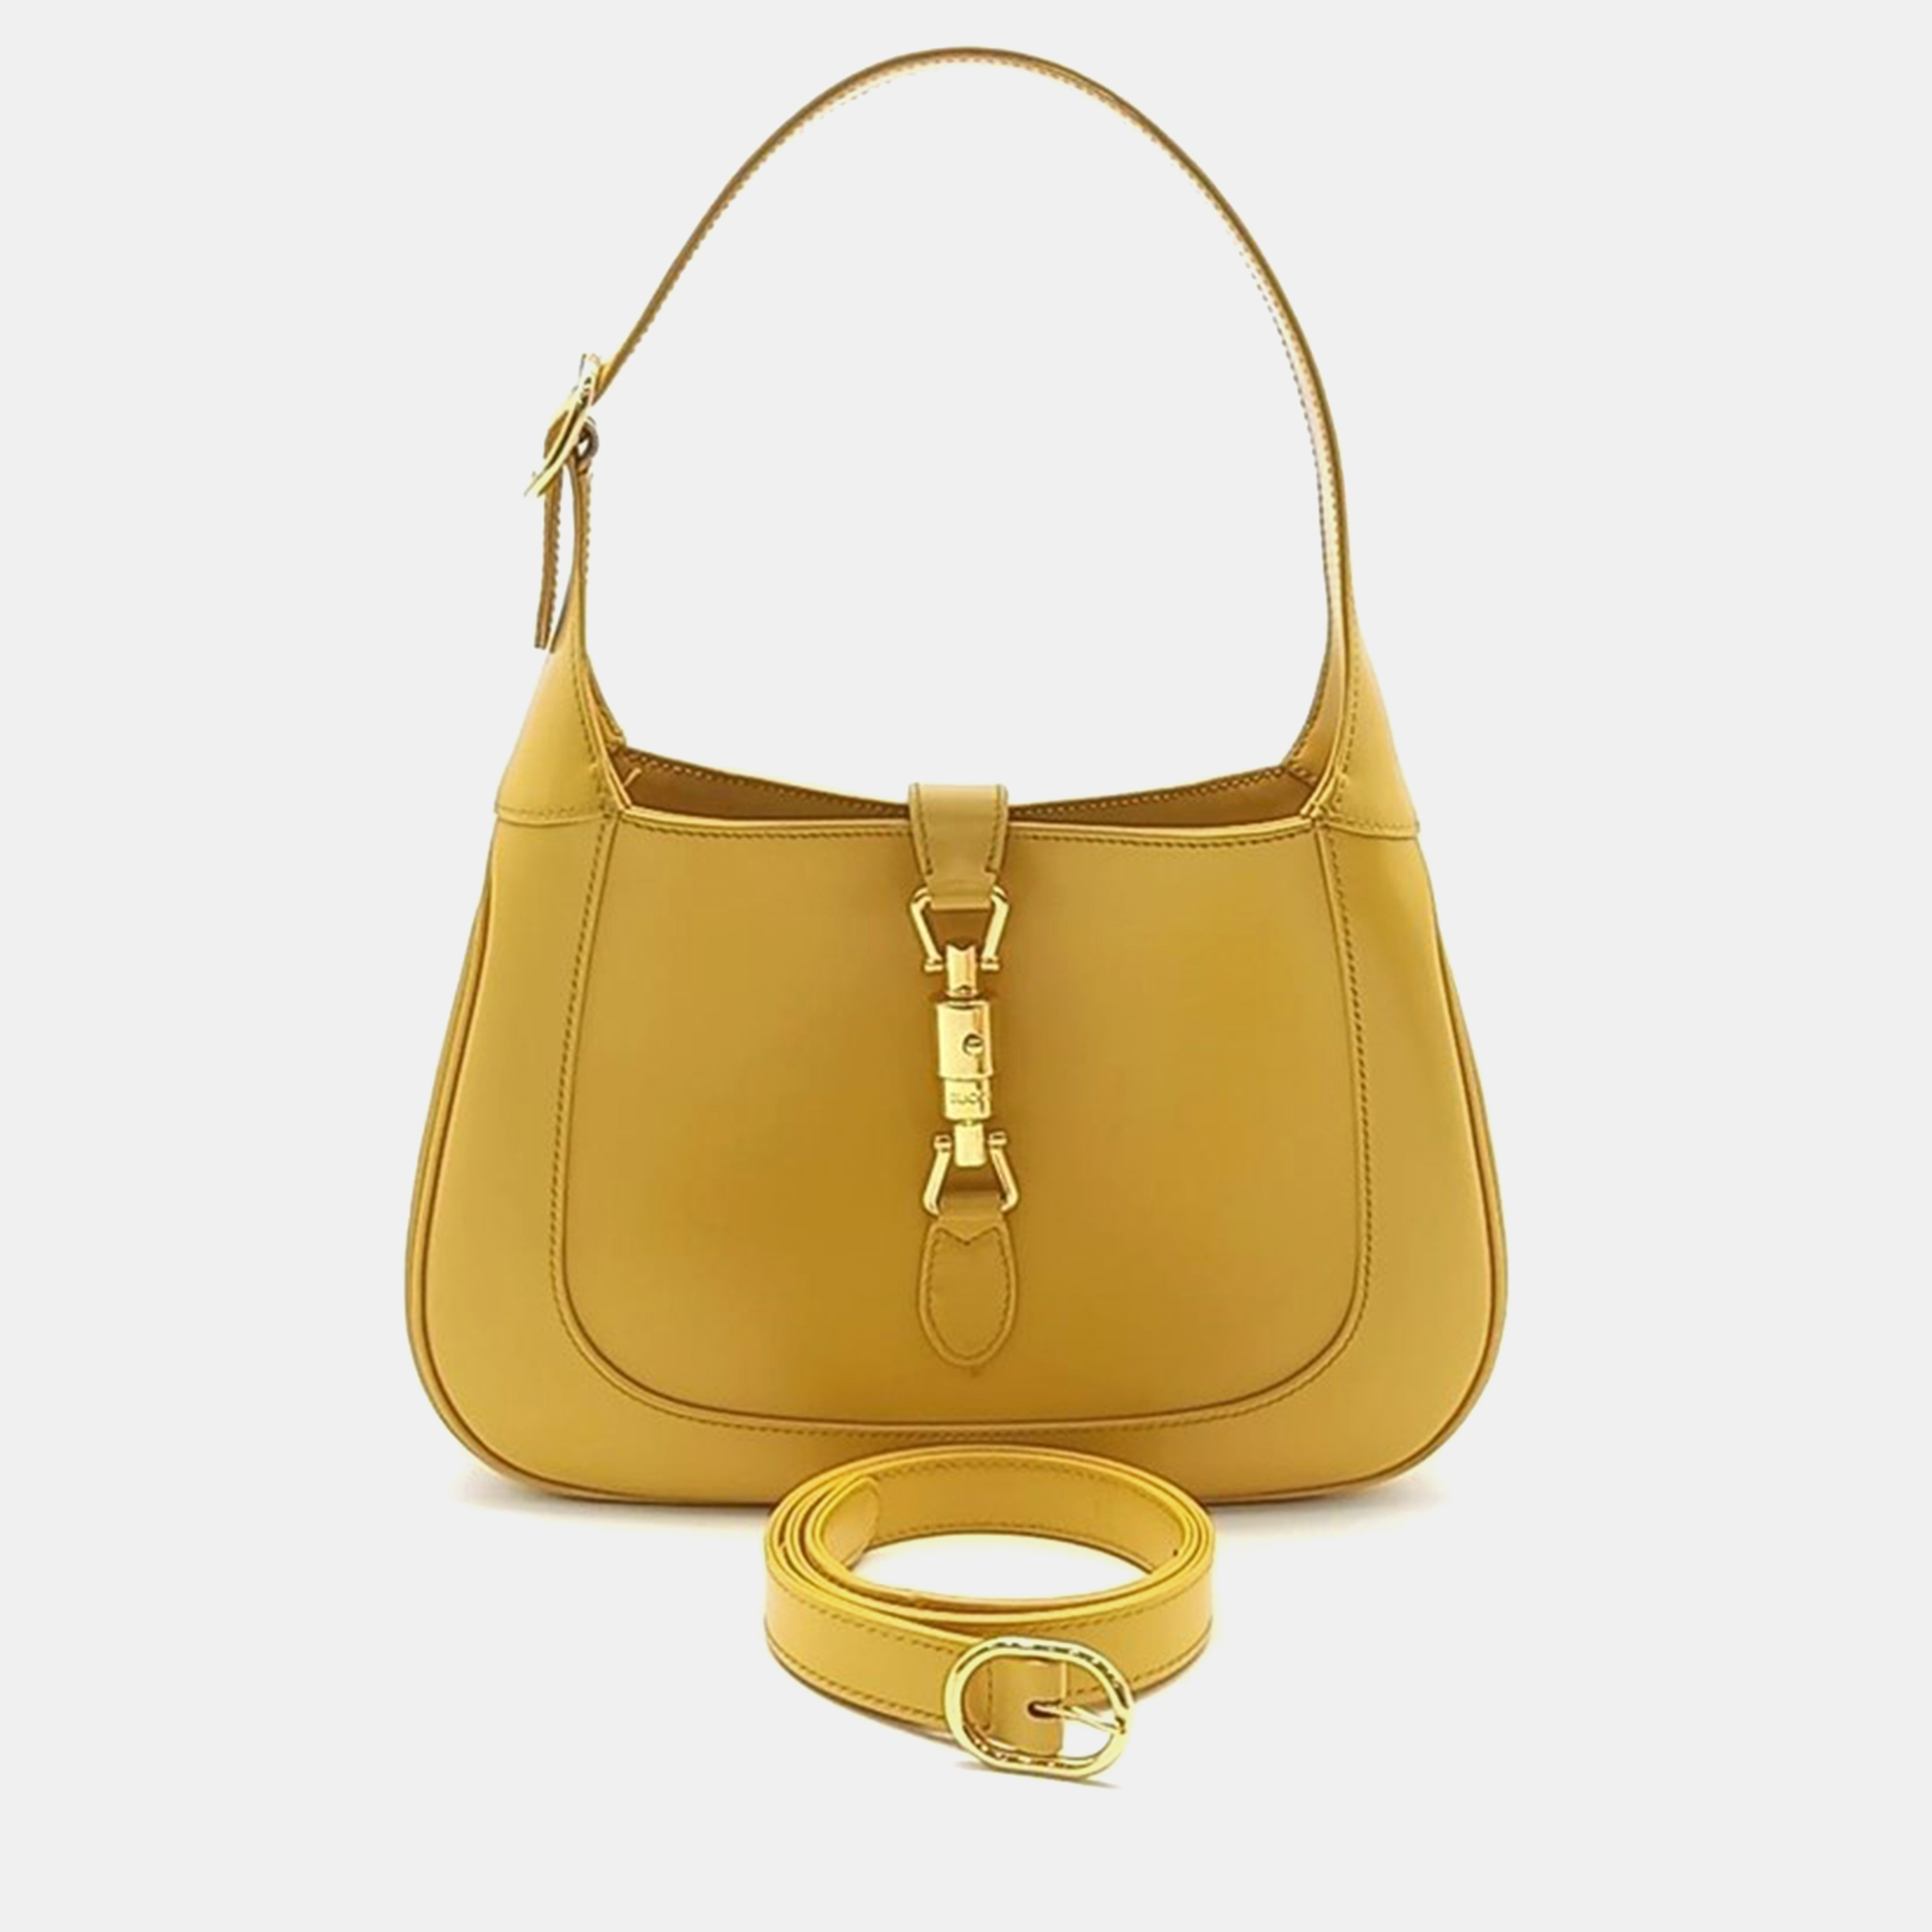 Crafted with precision this Gucci hobo bag combines luxurious materials with impeccable design ensuring you make a sophisticated statement wherever you go. Invest in it today.